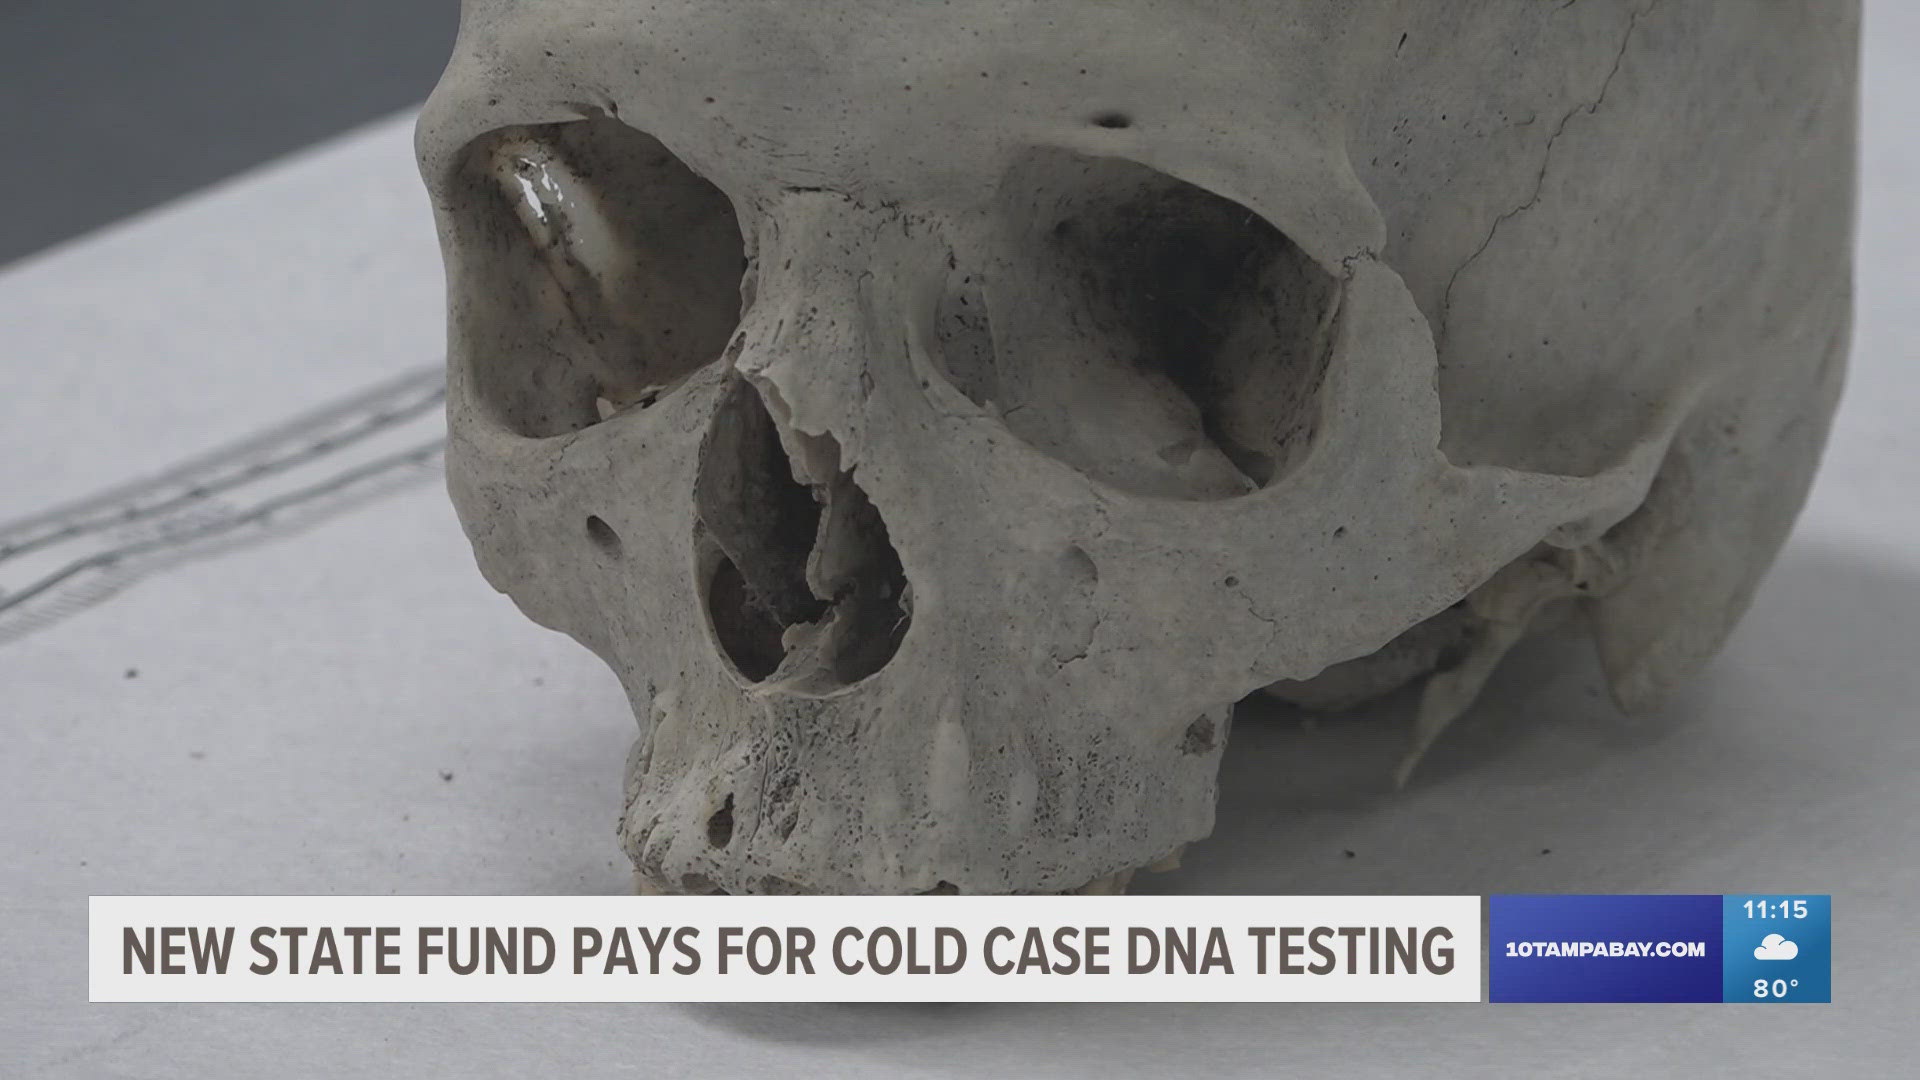 A new Florida state fund will pay for the cold case DNA testing.